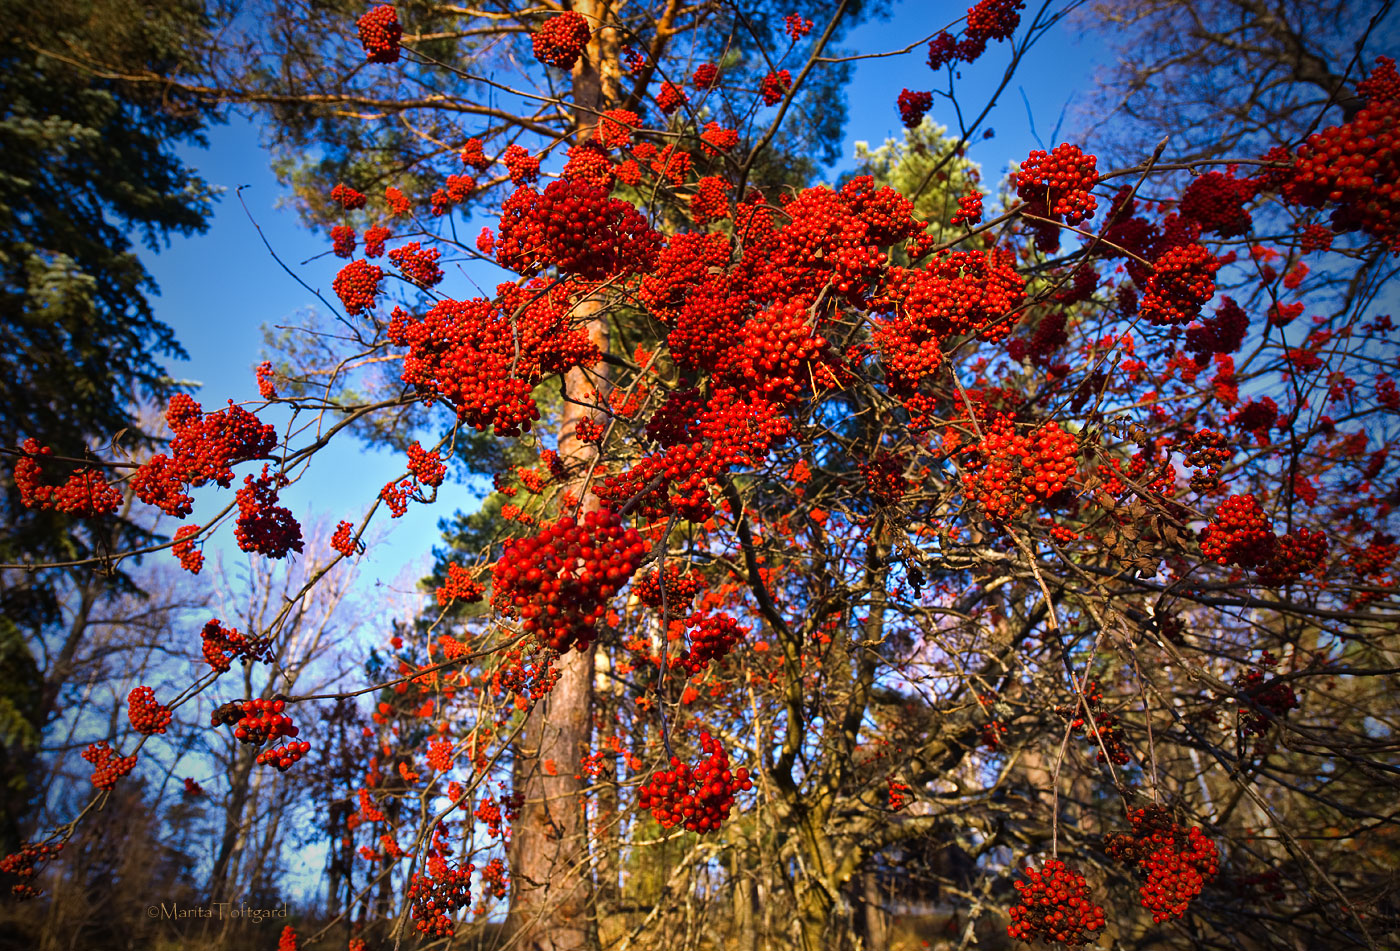 Point Me at the Sky - rowanberries, sorbus aucuparia